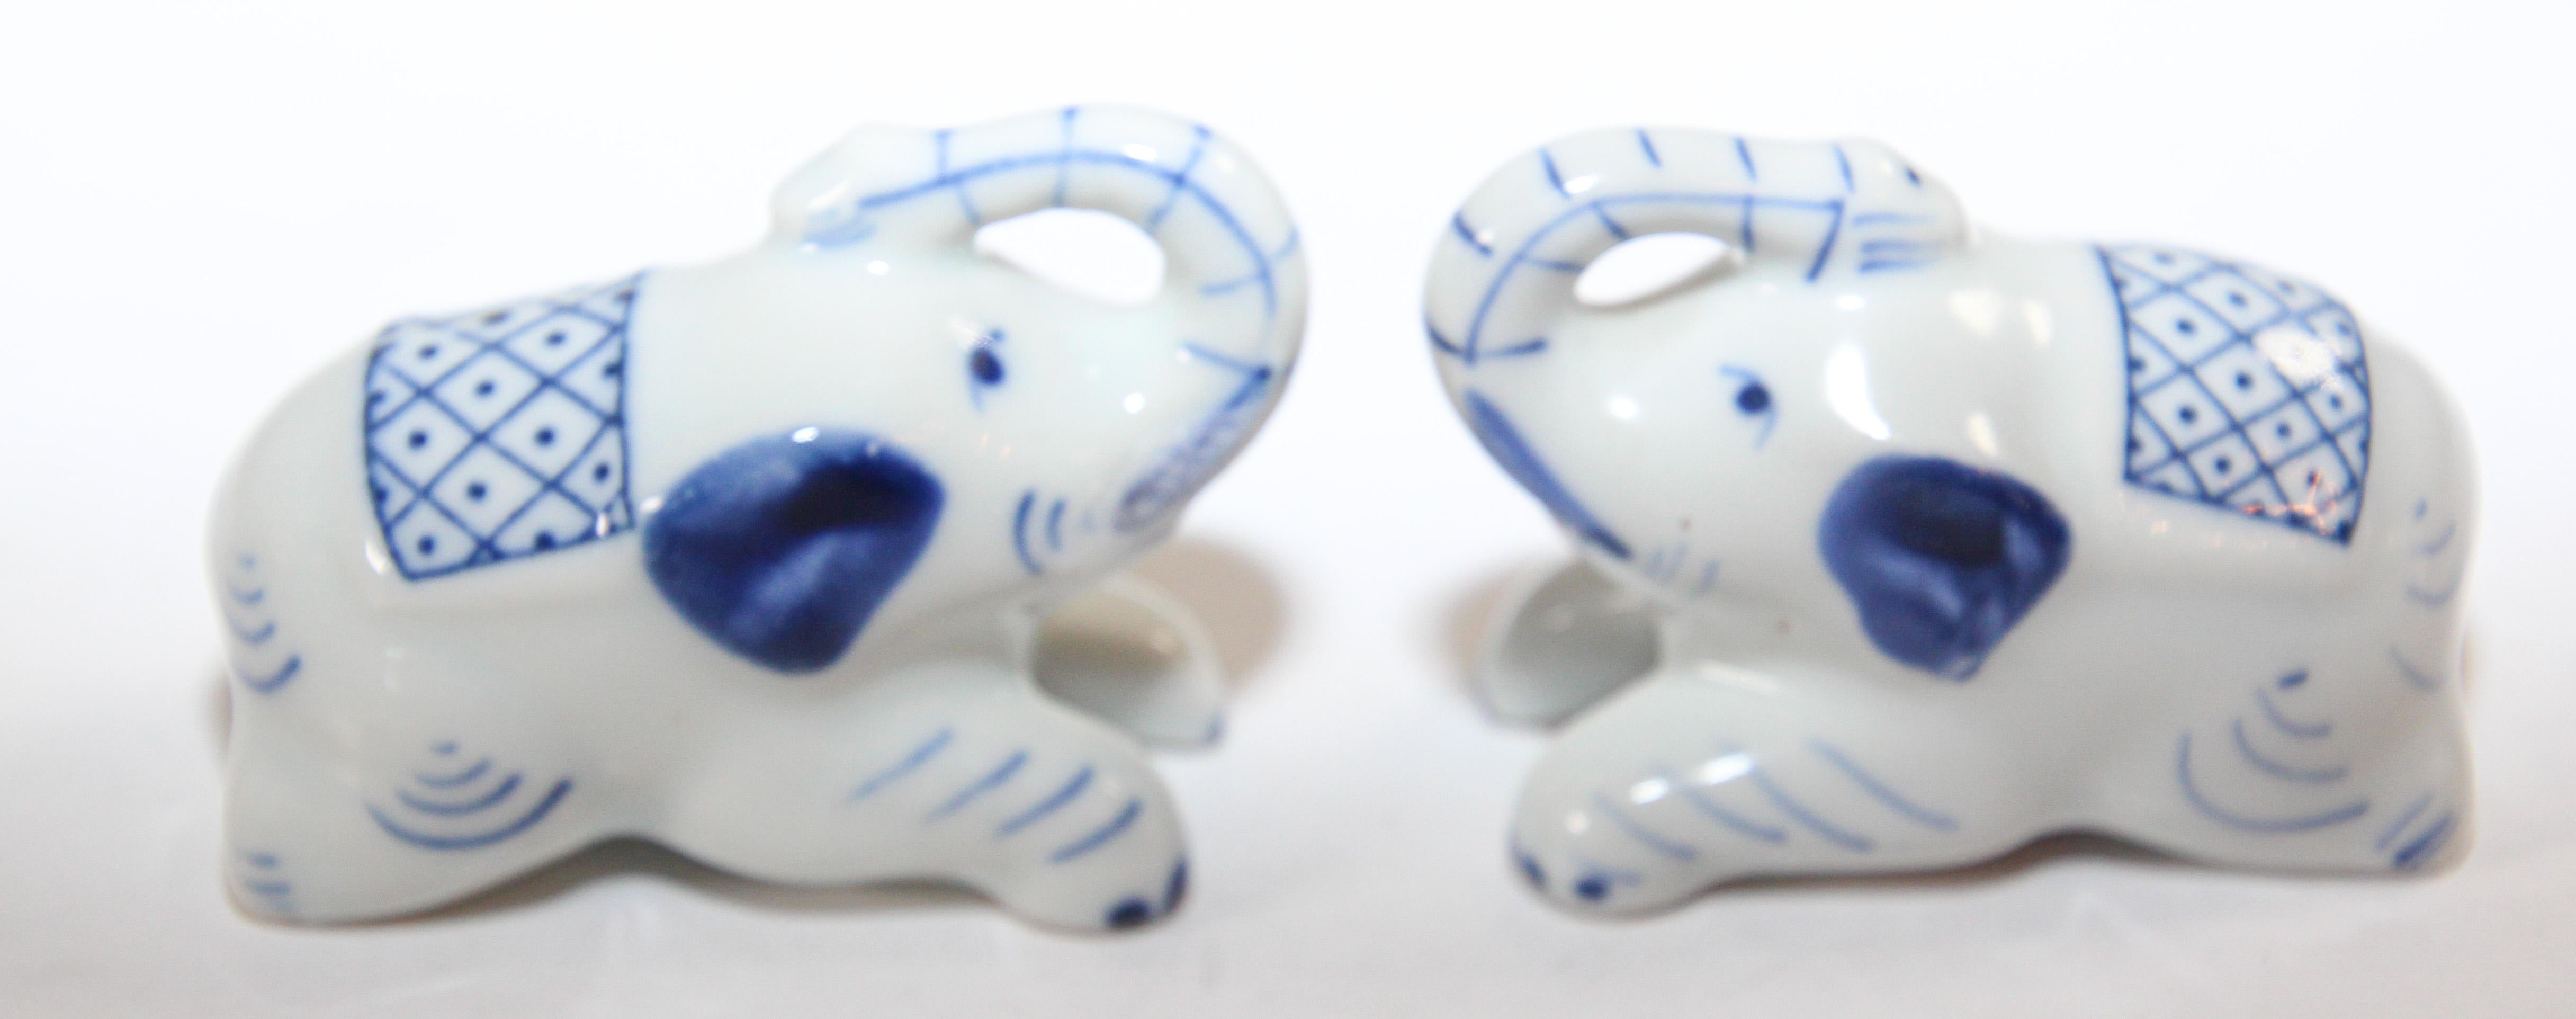 Vintage Porcelain Elephants Salt and Pepper Shakers with Tray Collectible In Good Condition For Sale In North Hollywood, CA